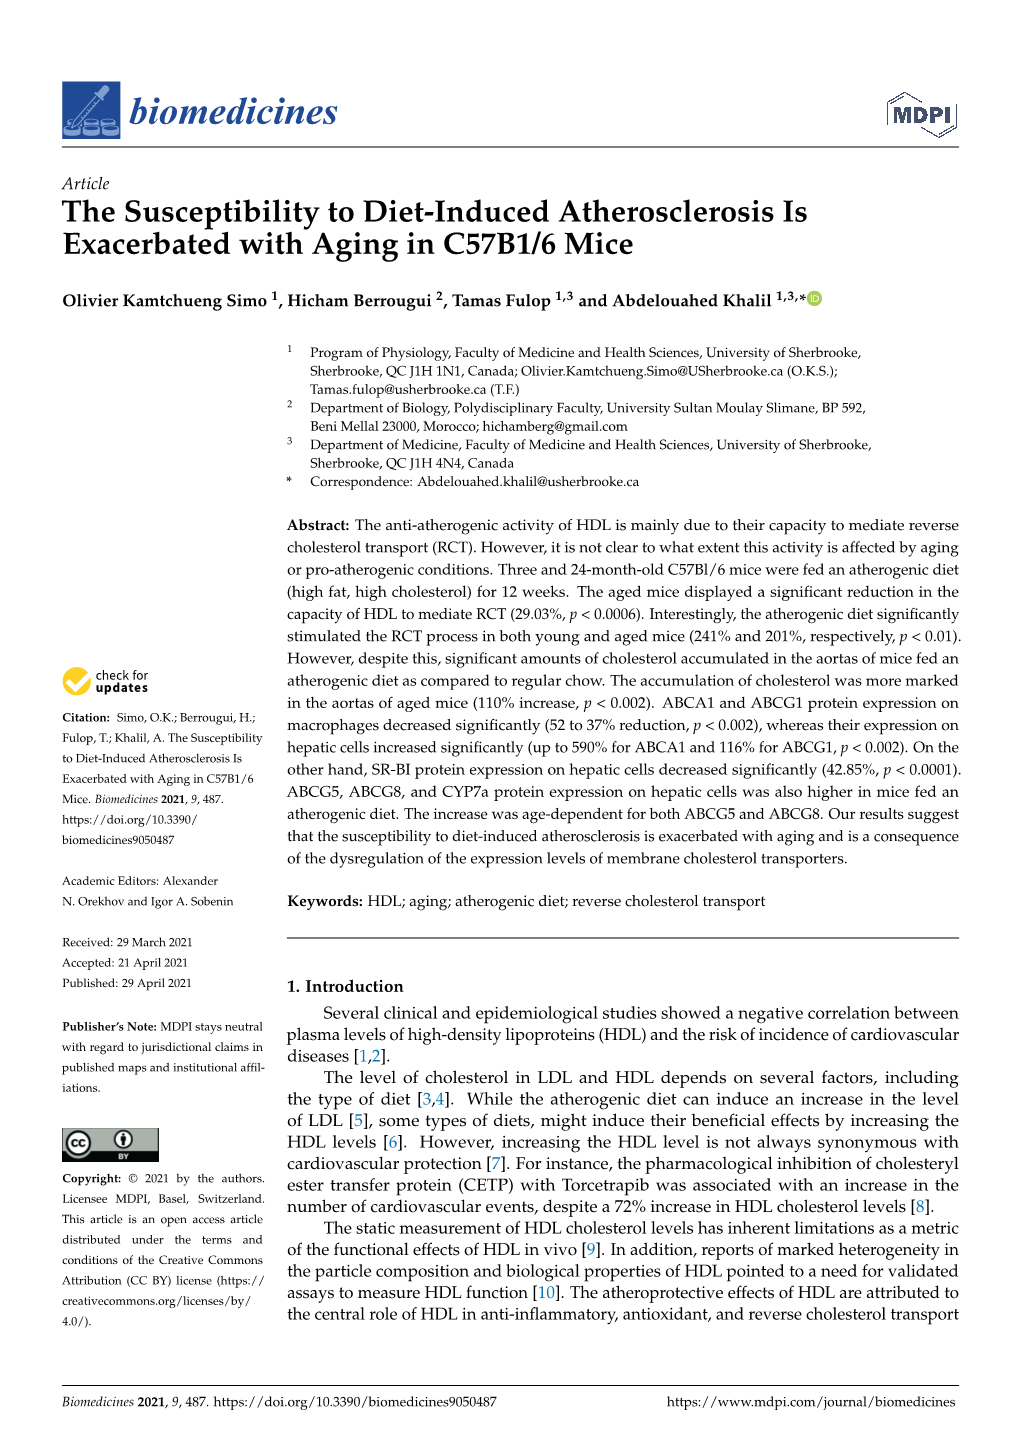 The Susceptibility to Diet-Induced Atherosclerosis Is Exacerbated with Aging in C57B1/6 Mice